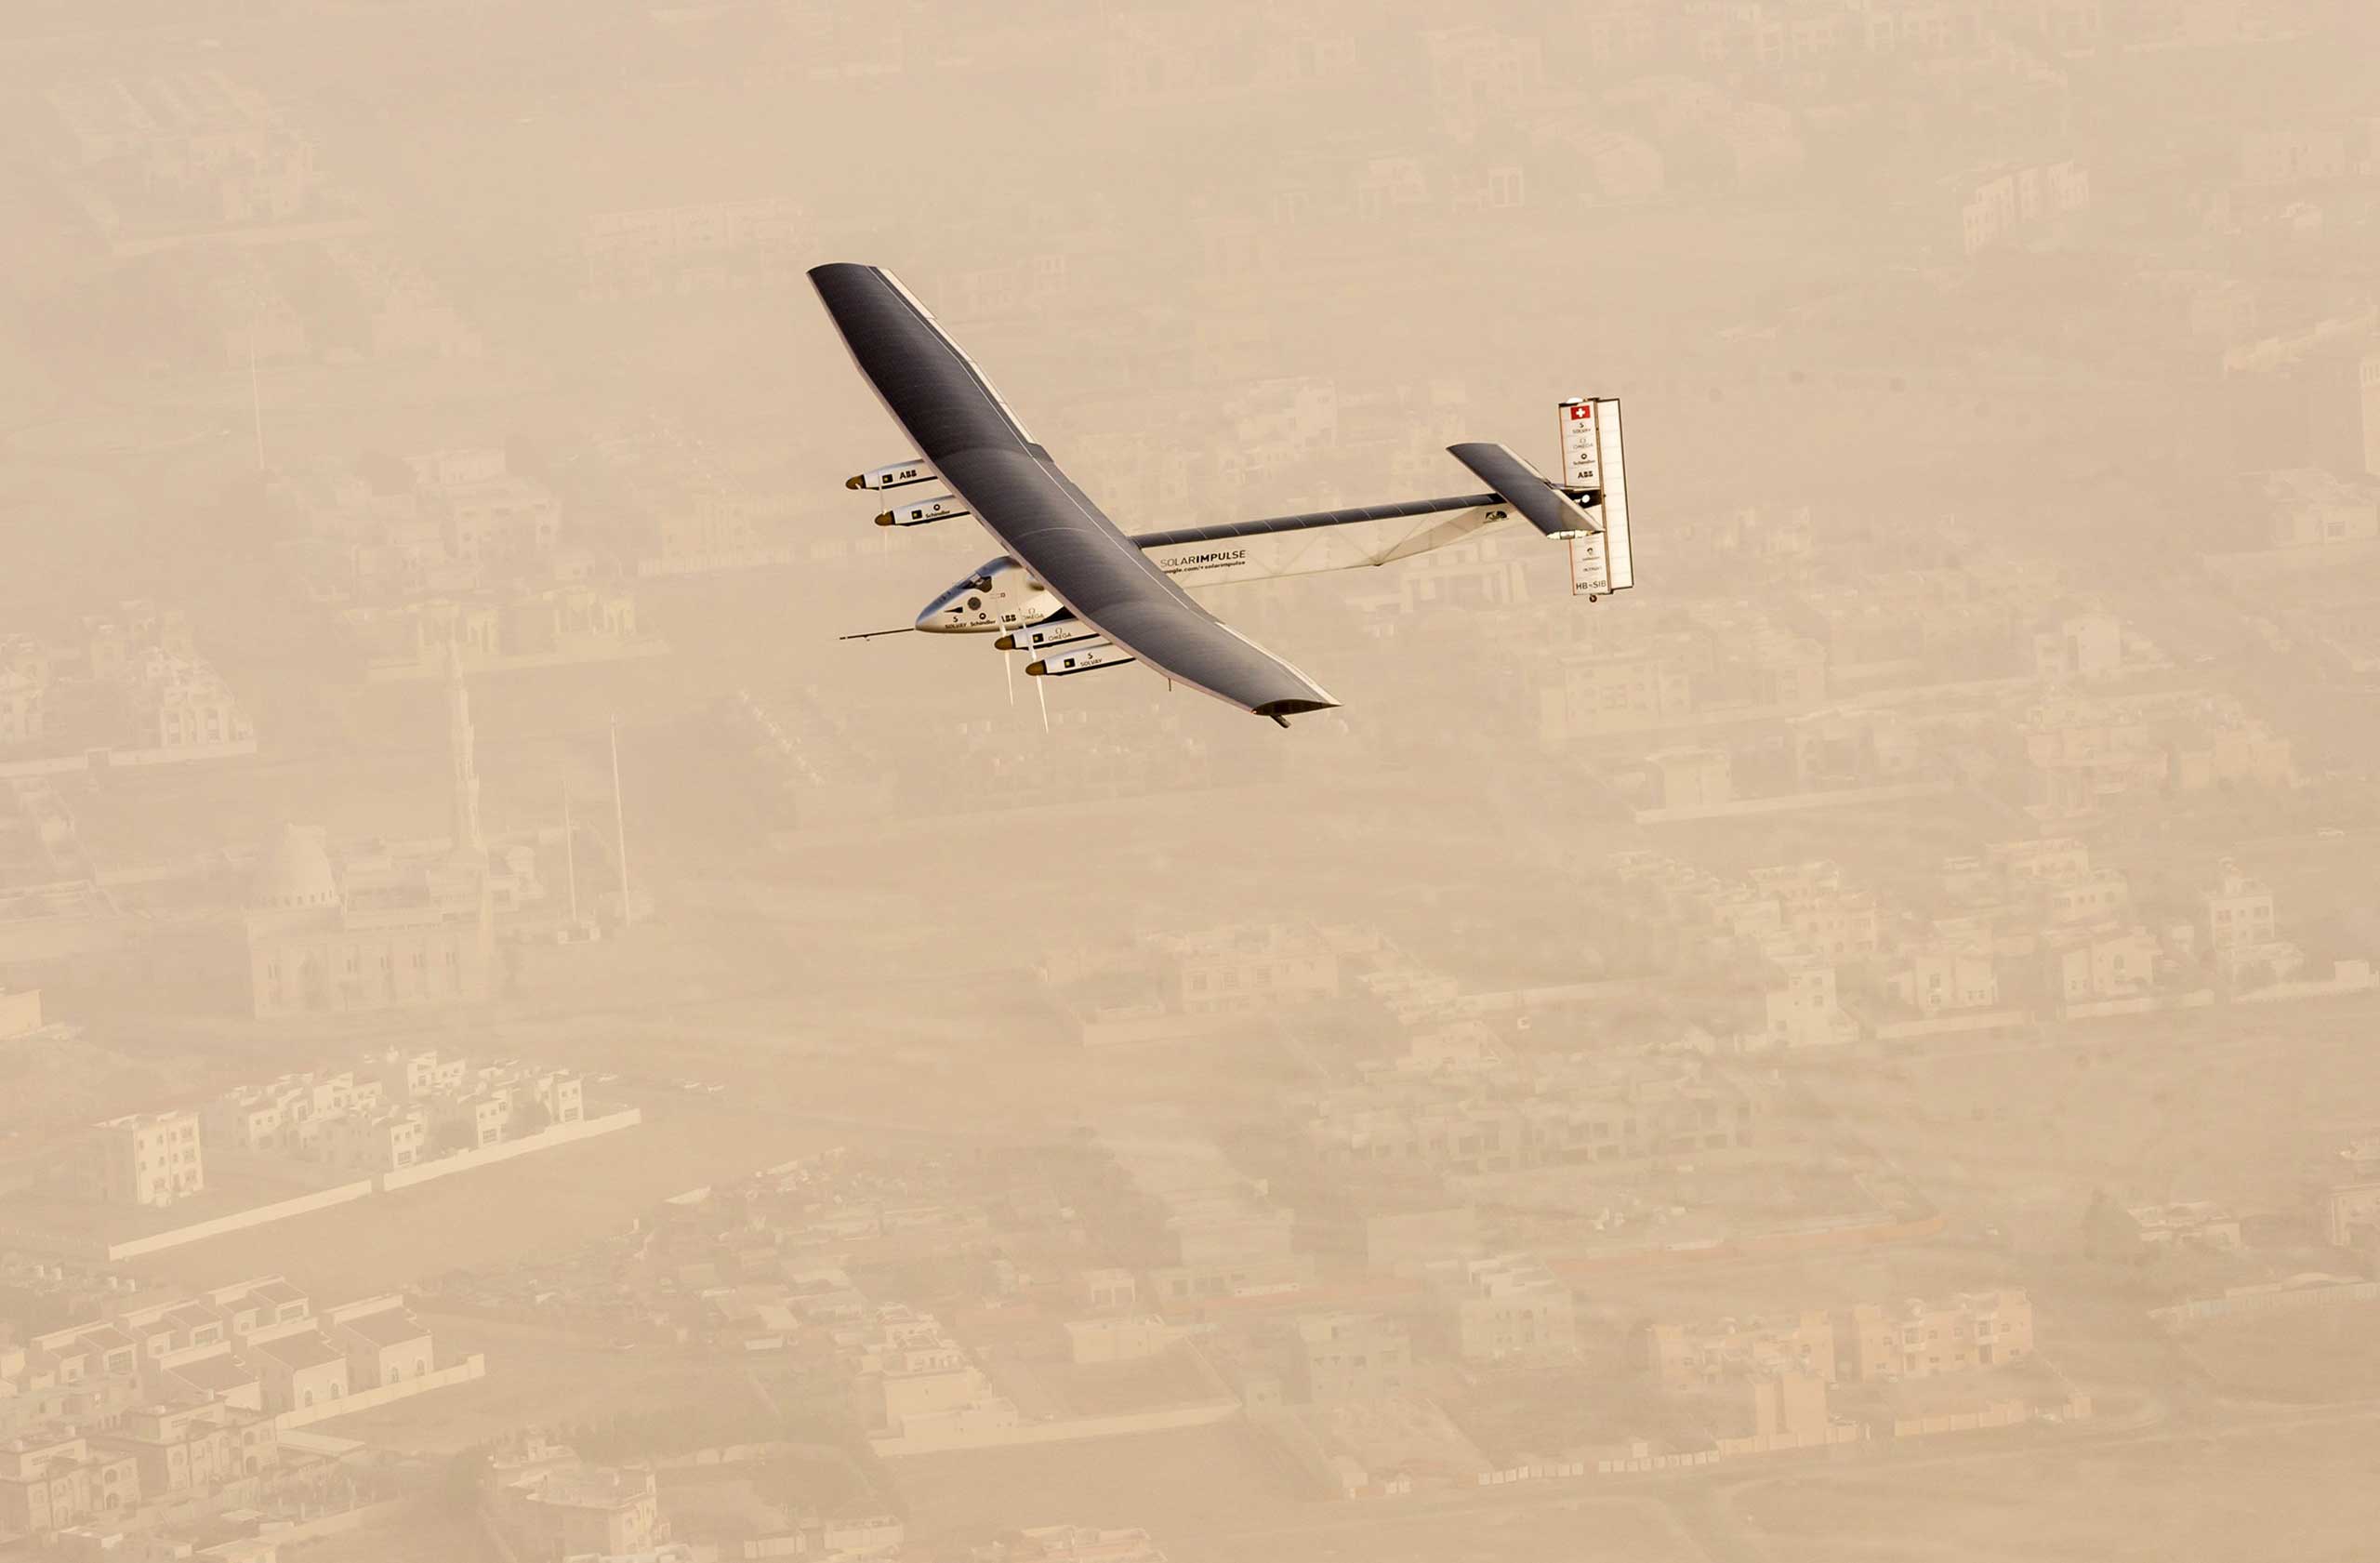 Solar Impulse 2, a solar-powered airplane, takes flight as it begins its historic round-the-world journey from Al Bateen Airport in Abu Dhabi on March 9, 2015.